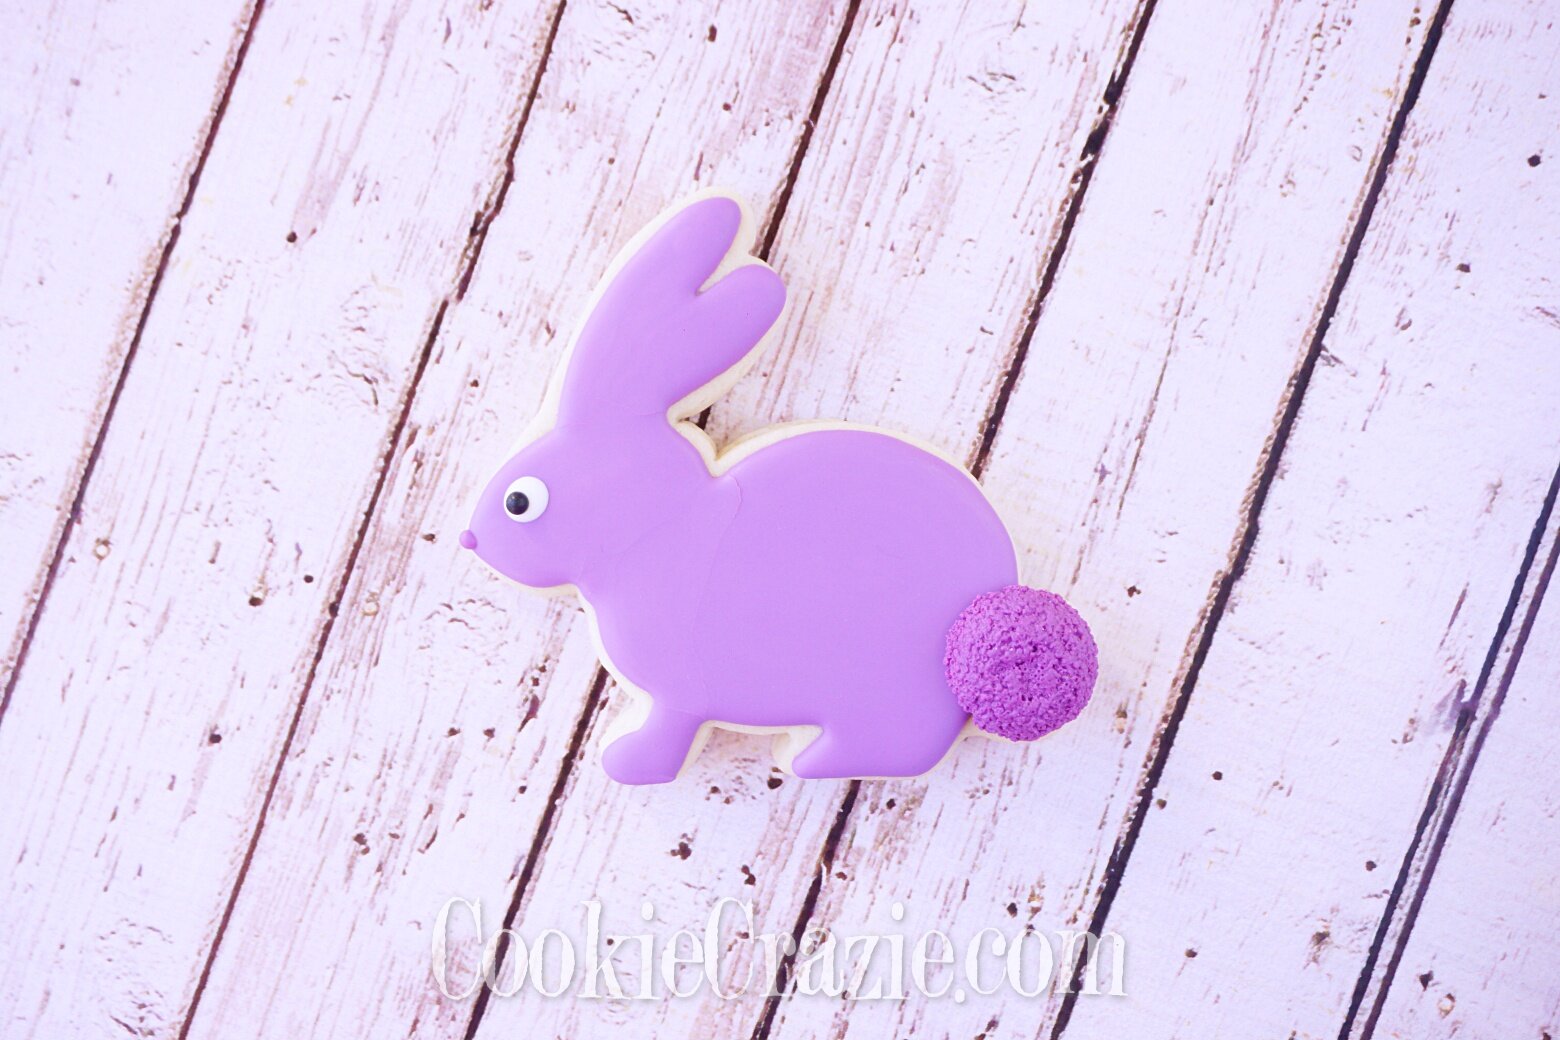  Rabbit Decorated Sugar Cookie YouTube video  HERE  